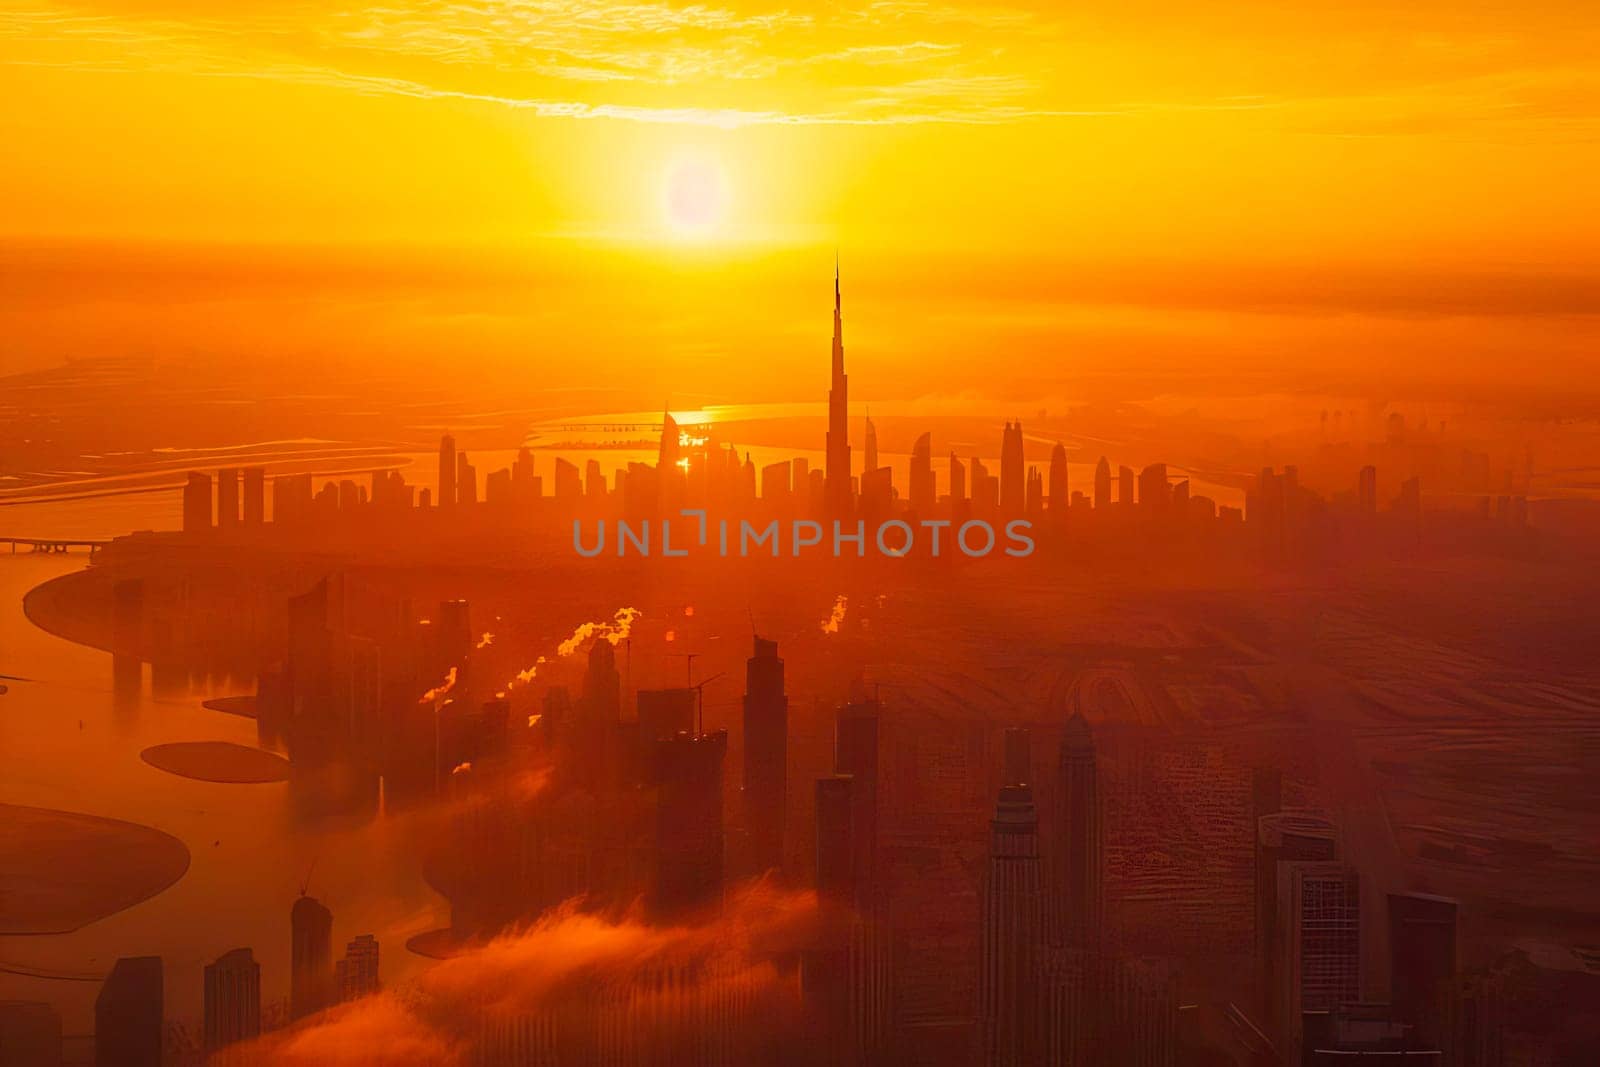 The sun setting over a sprawling cityscape with tall buildings and lights coming on.